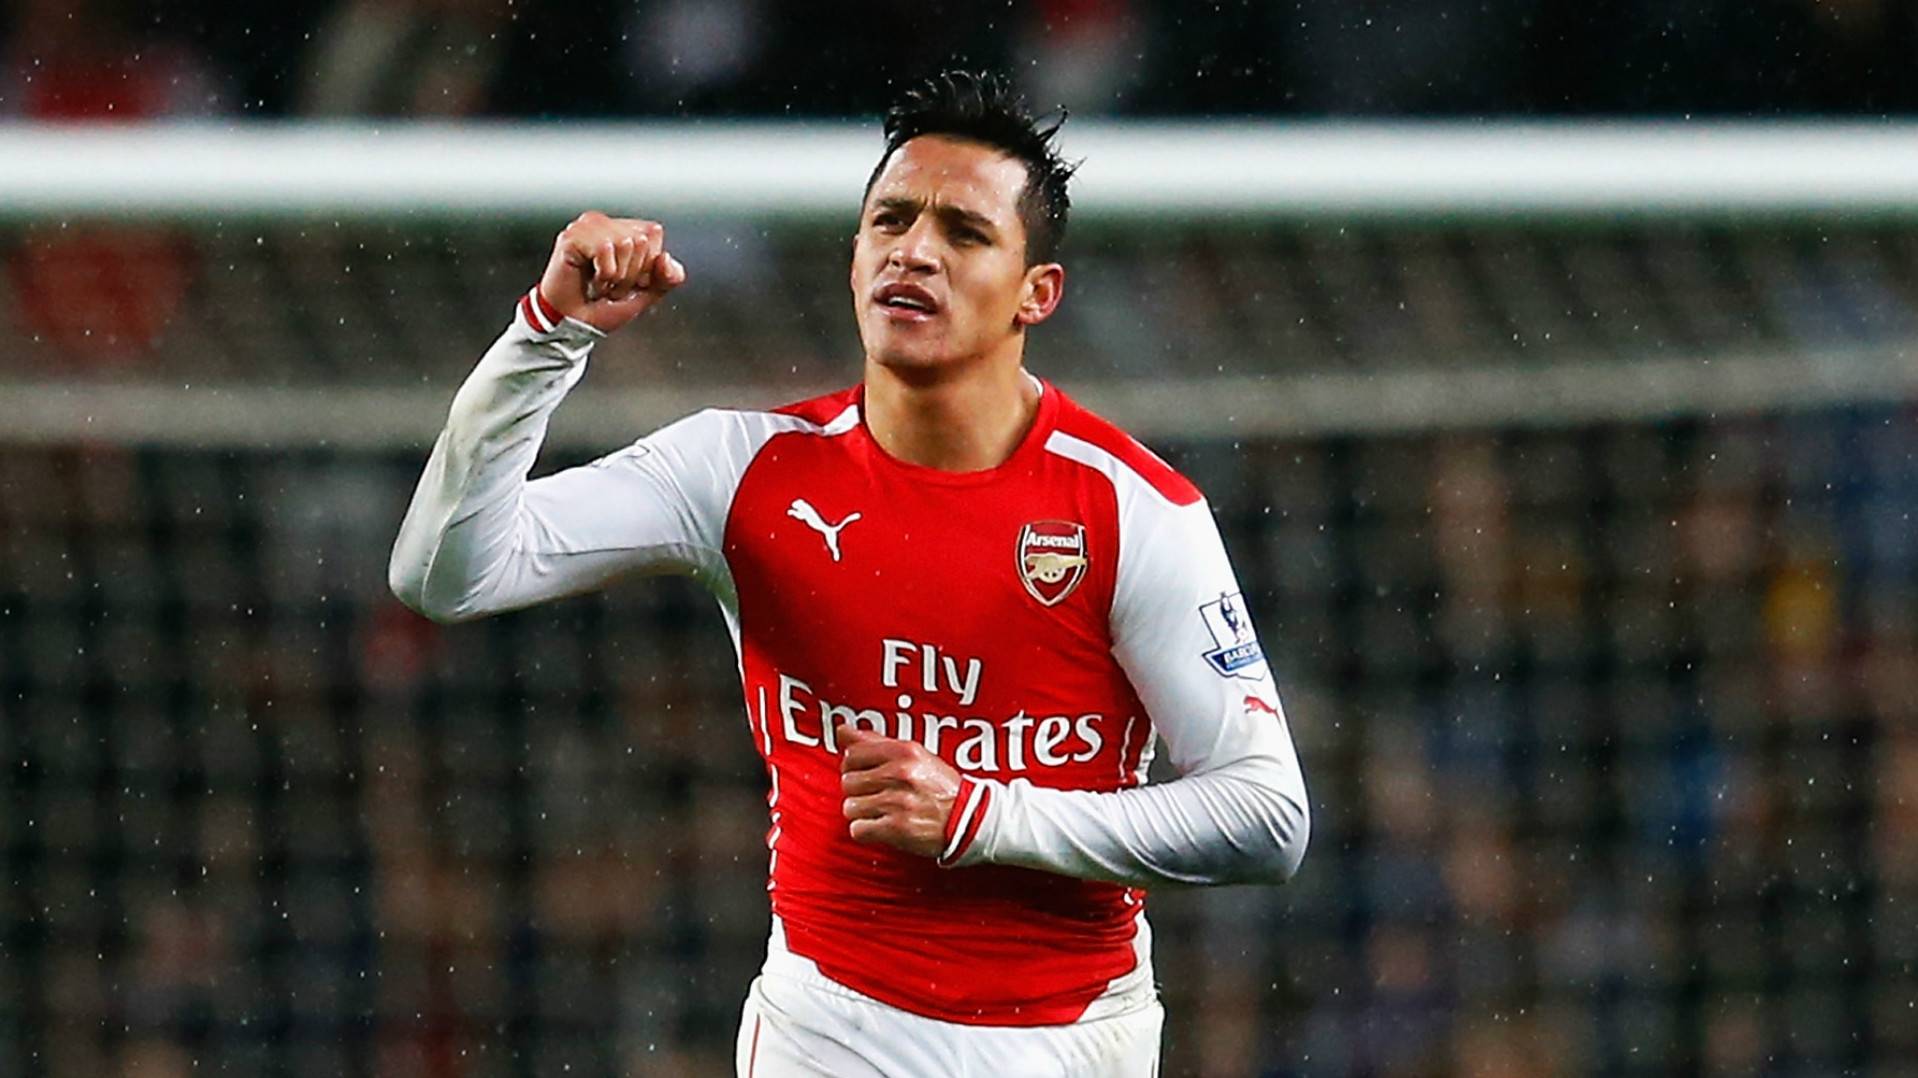 Alexis Sánchez, celebrating a goal with the T-shirt of the Arsenal